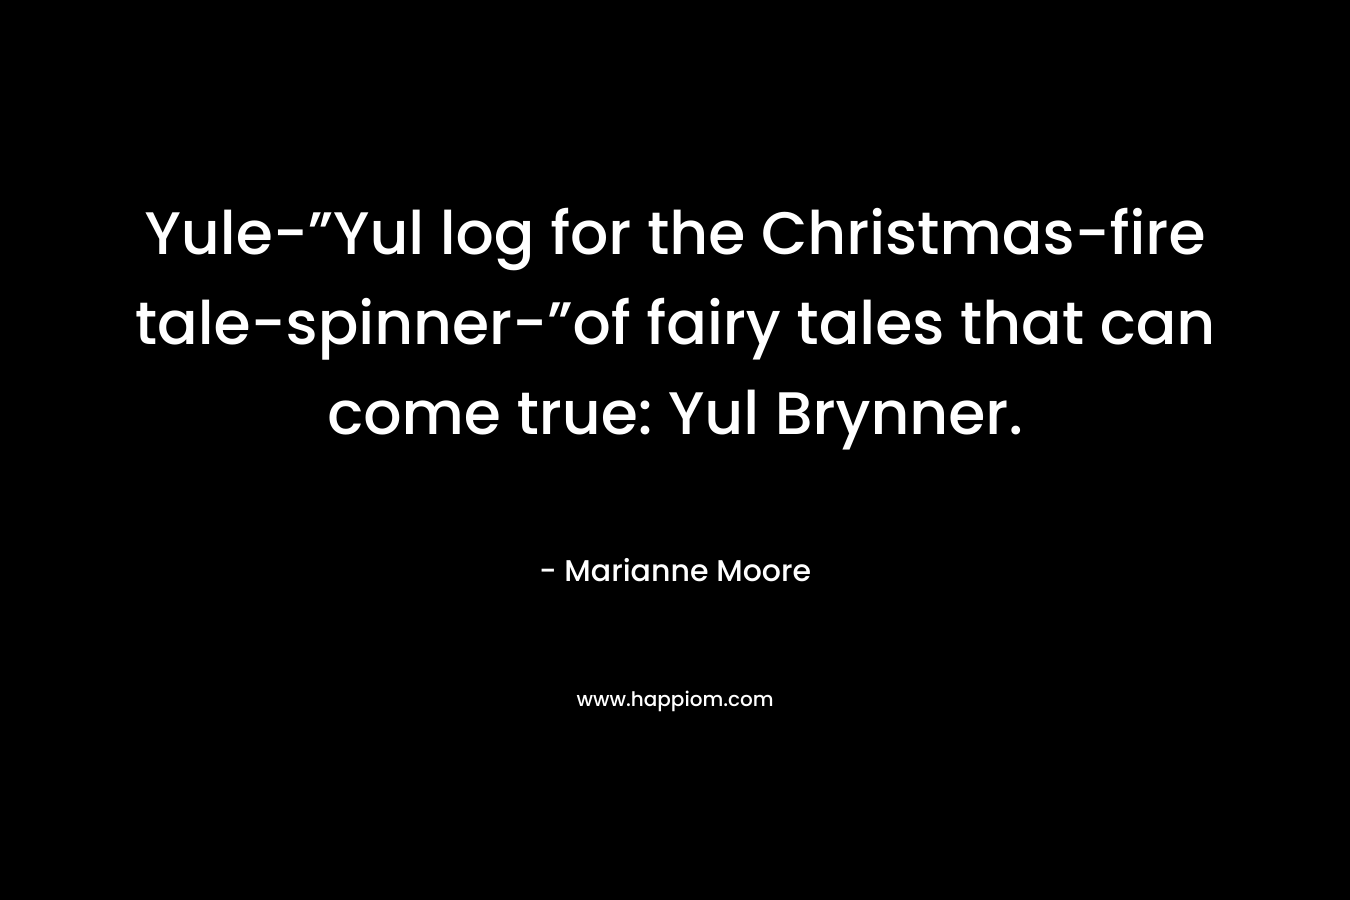 Yule-”Yul log for the Christmas-fire tale-spinner-”of fairy tales that can come true: Yul Brynner.